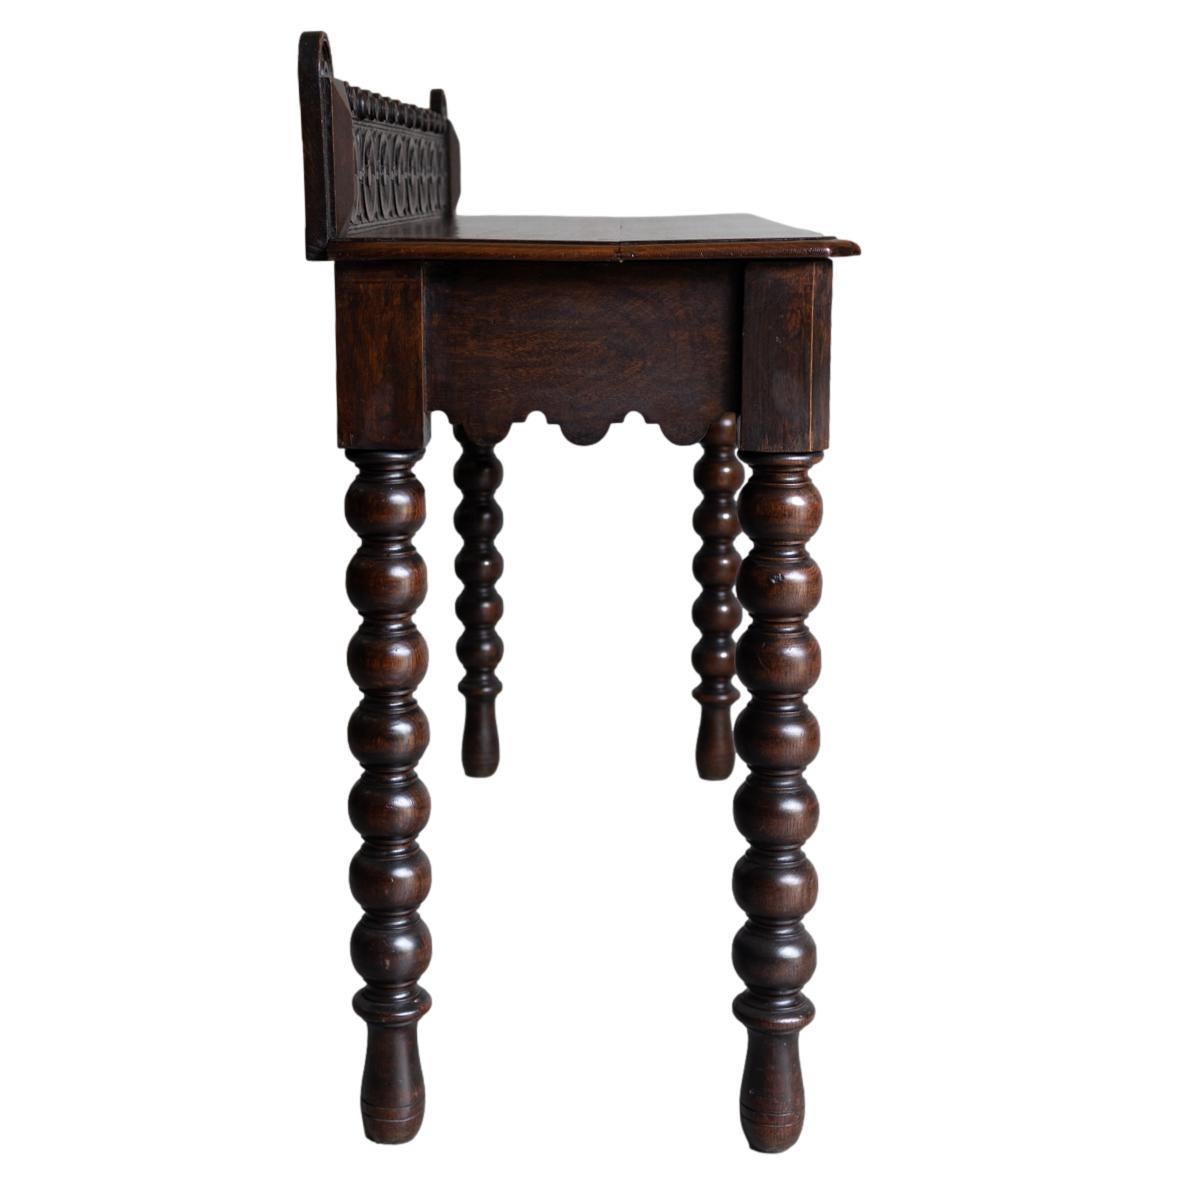 19th Century A Gothic Hand-Carved Oak Console Table, Hidden Frieze Drawer, English, ca. 1870